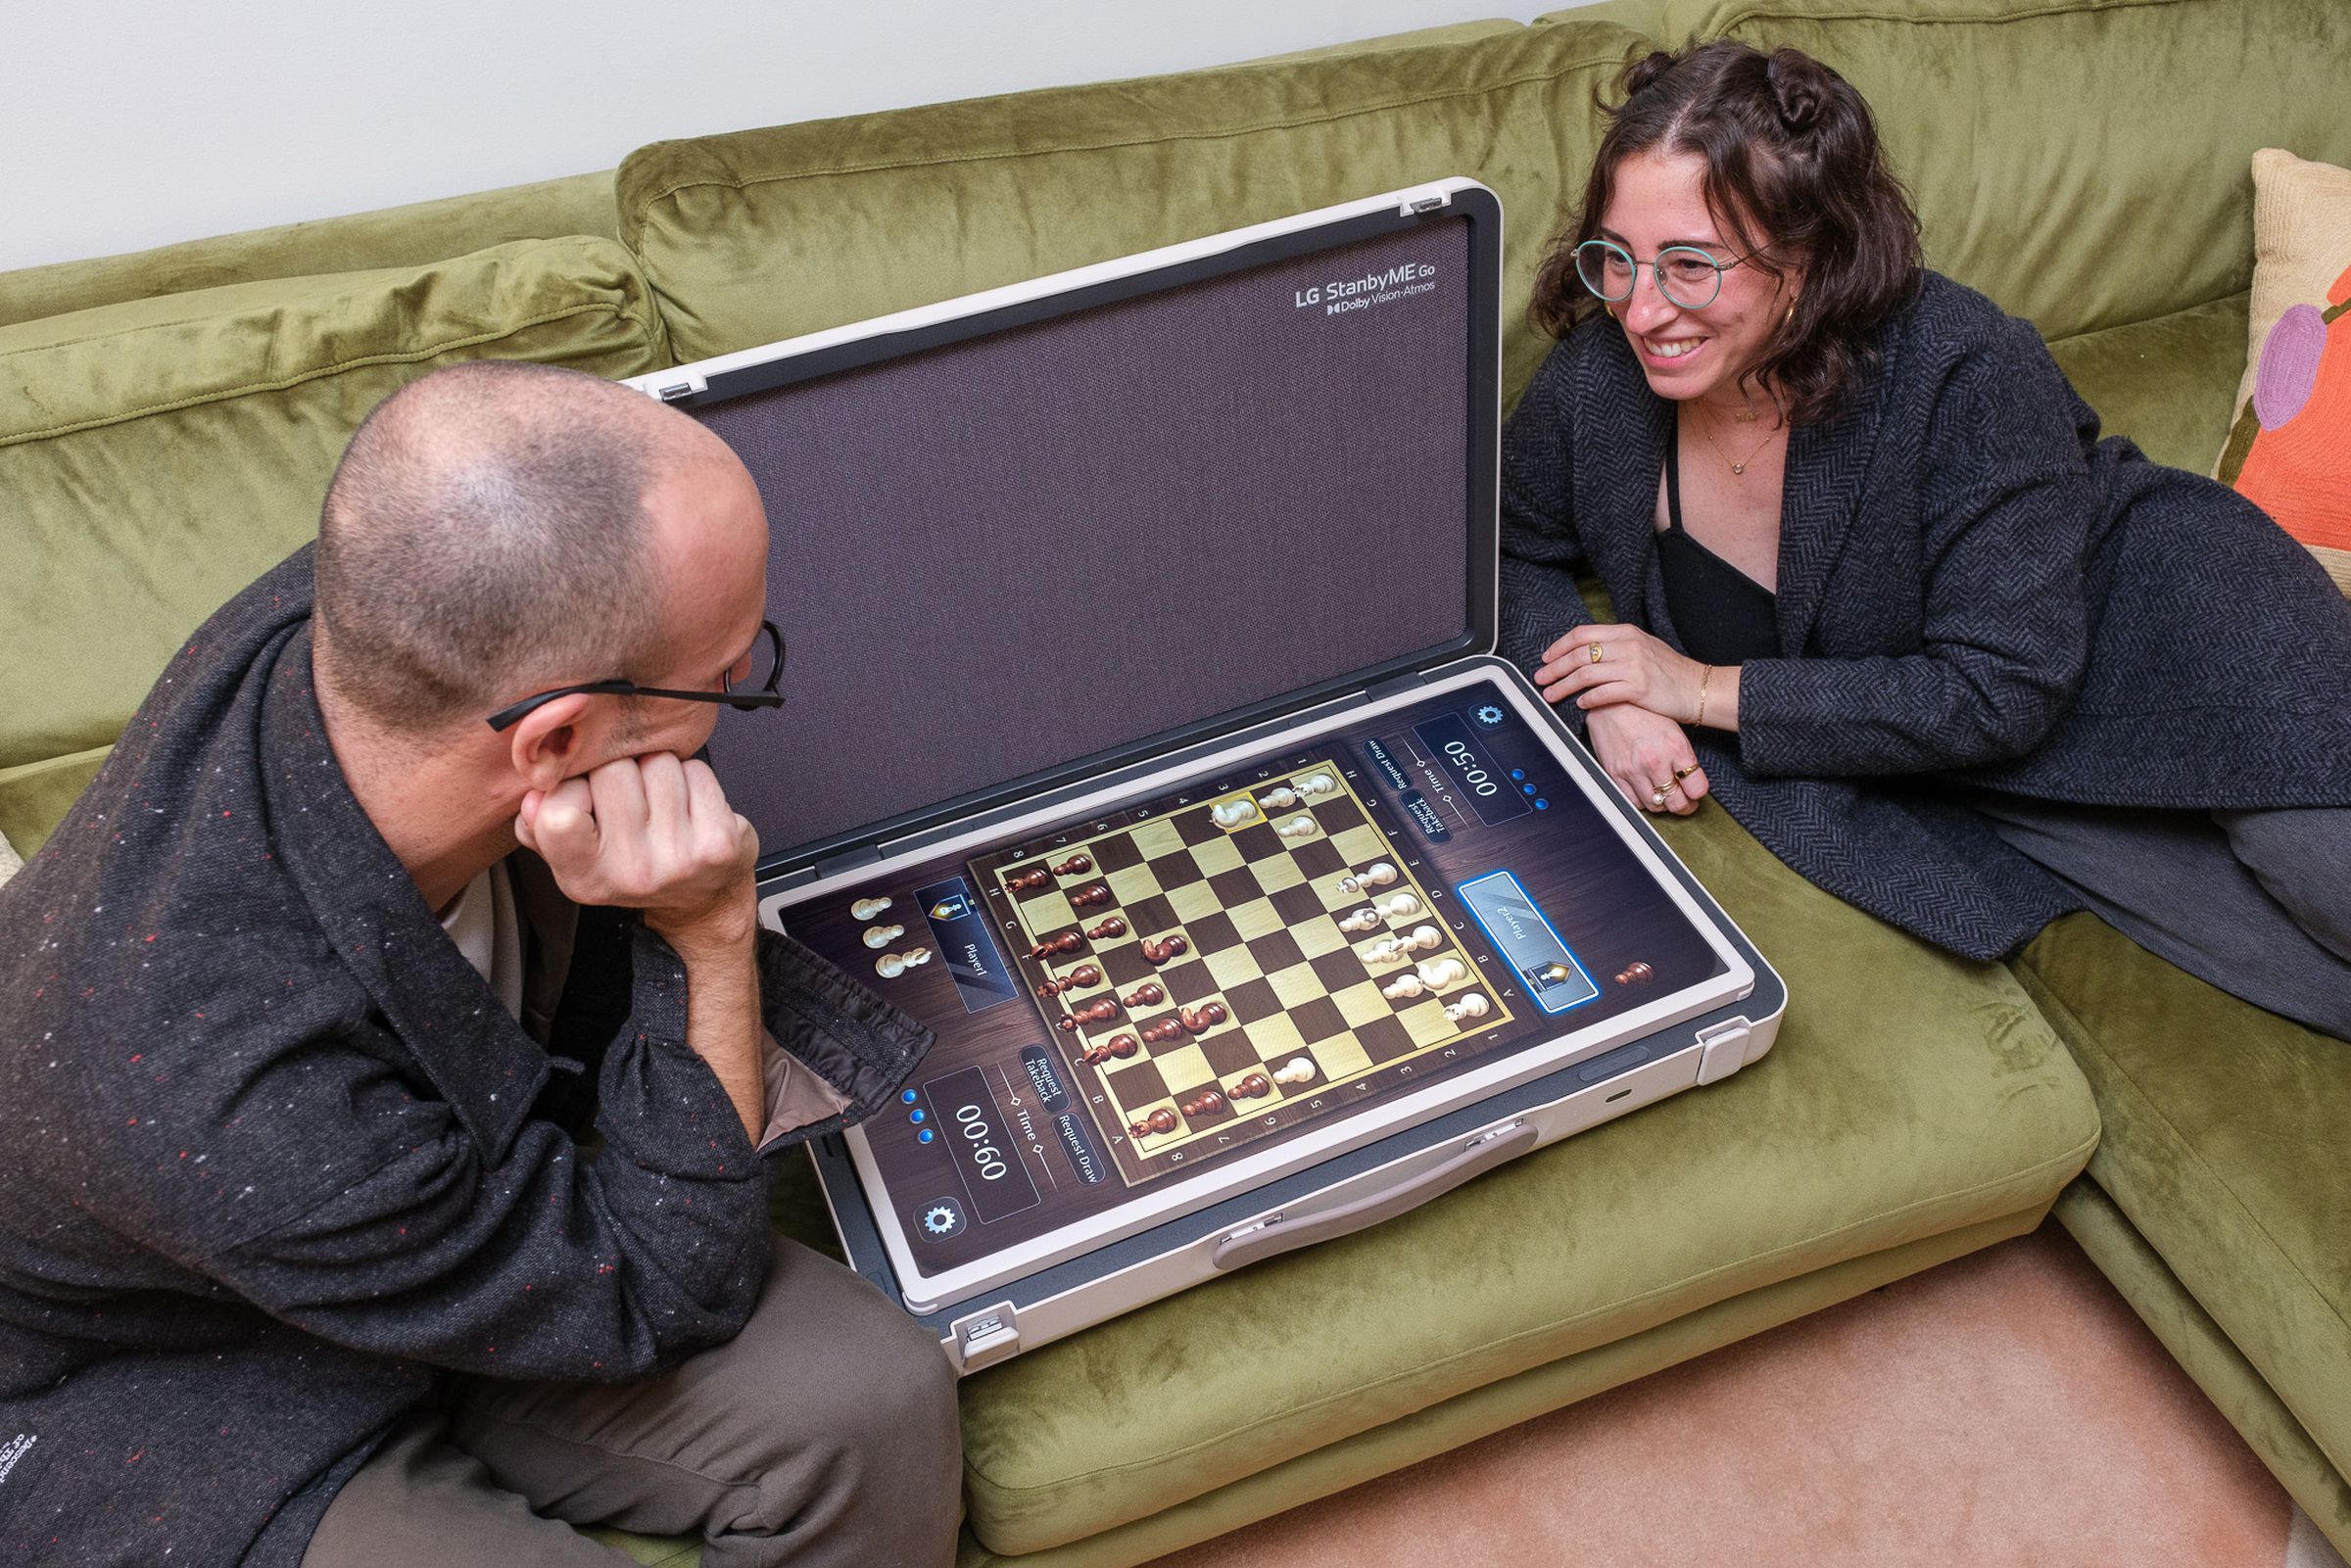 A photo of a couple playing touchscreen chess on LG’s StanbyME Go briefcase TV.